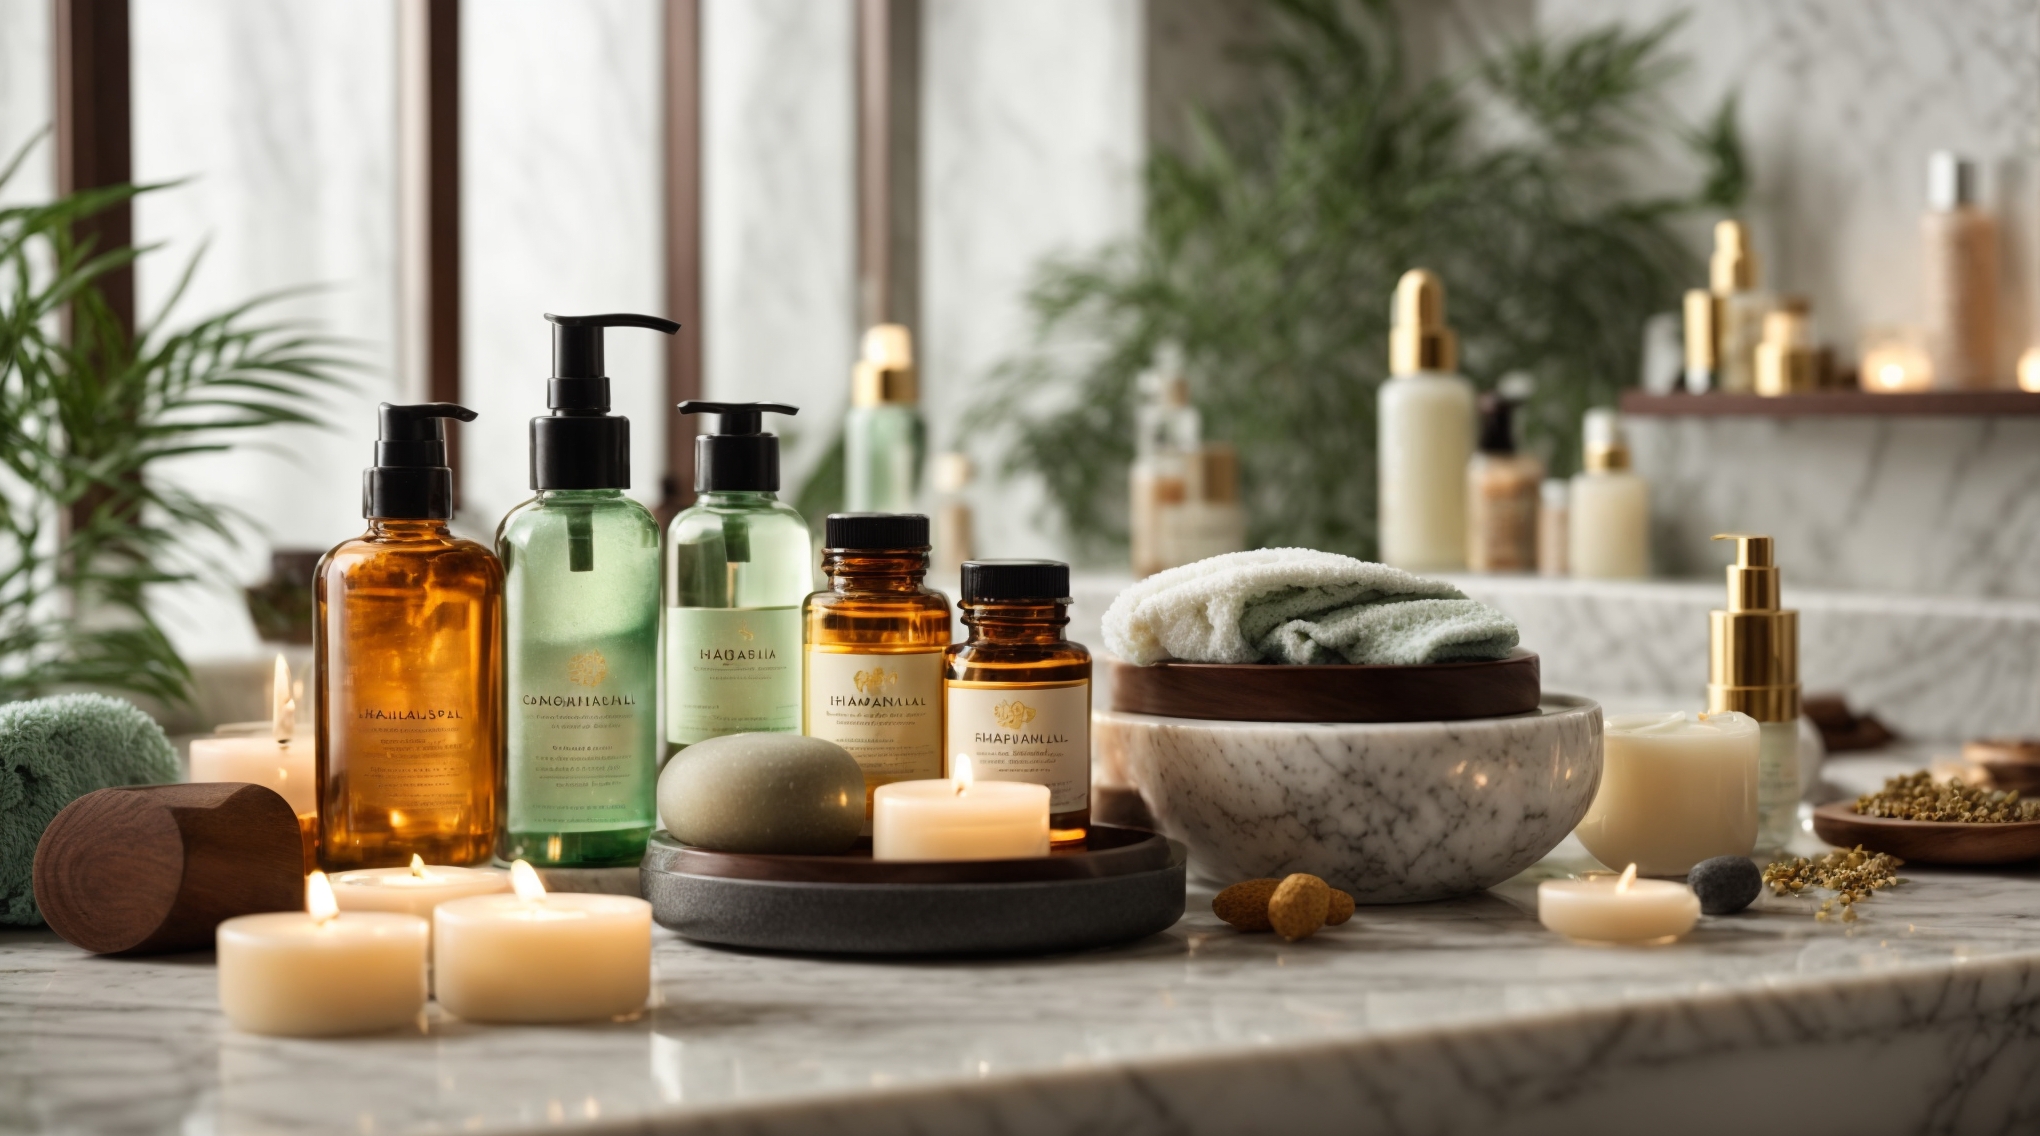 A luxurious spa setting with a variety of CBD products